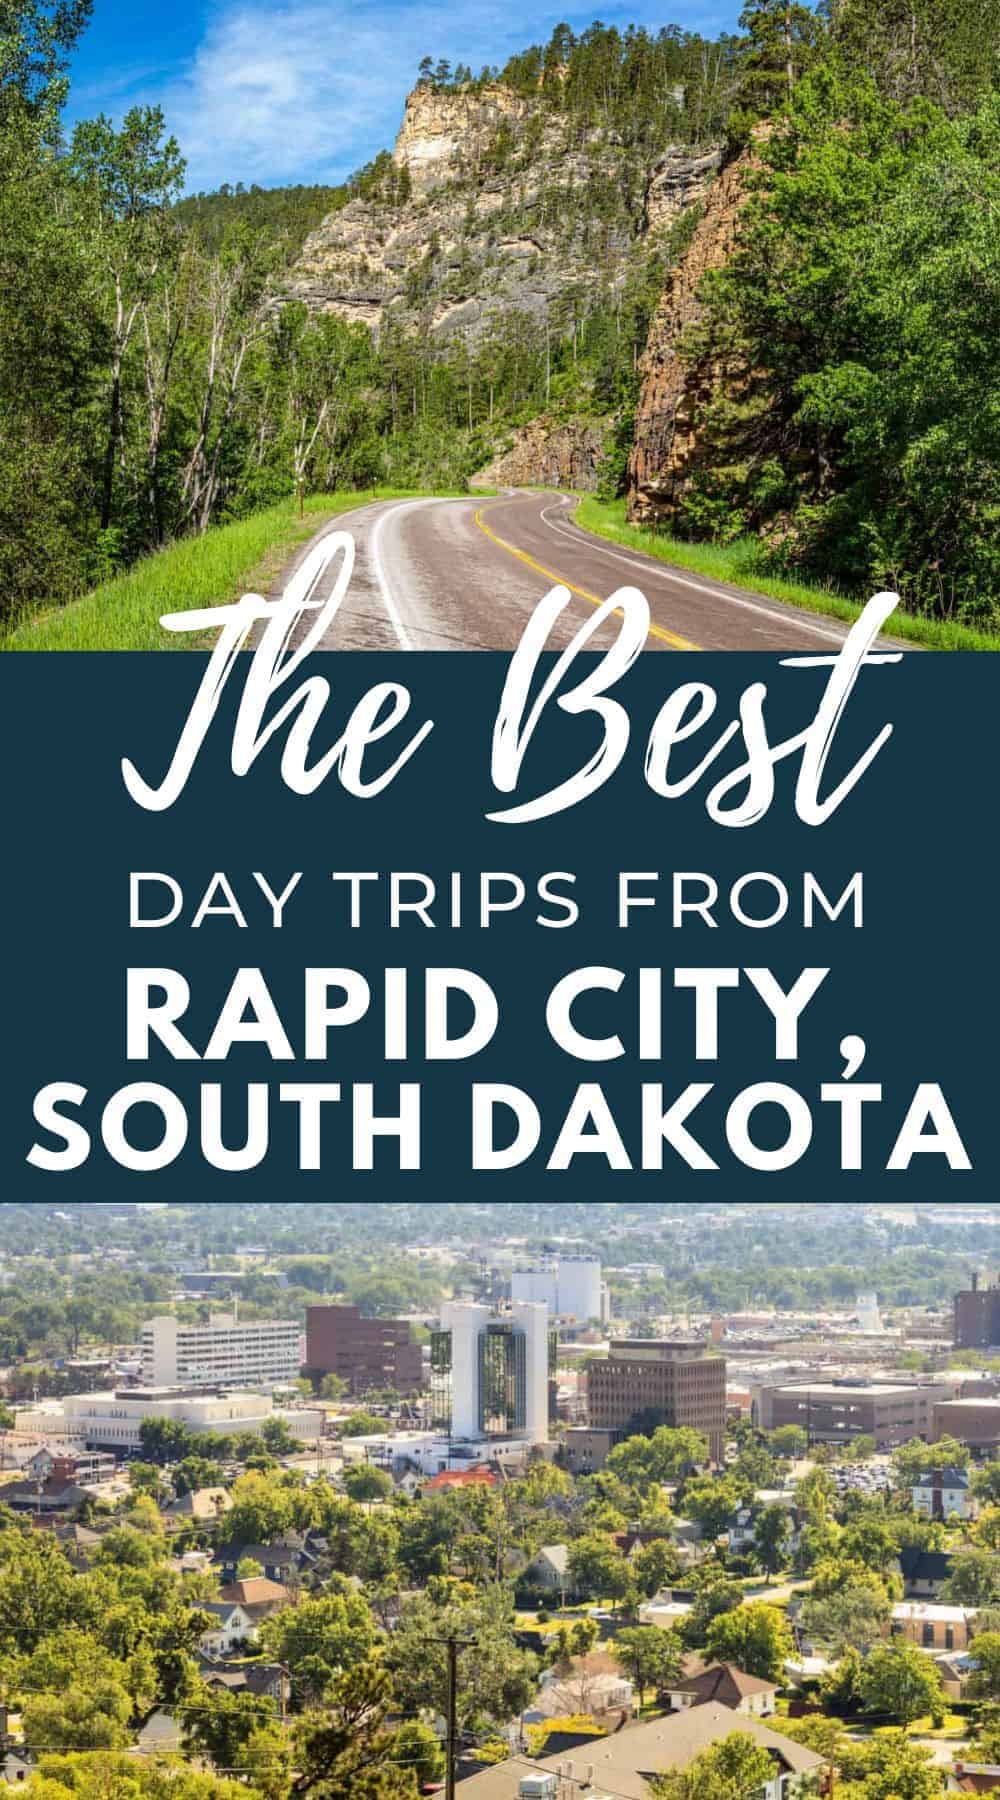 Images of Rapid South Dakota and Spearfish Canyon. Text reads: the best day trips from Rapid City, South Dakota.